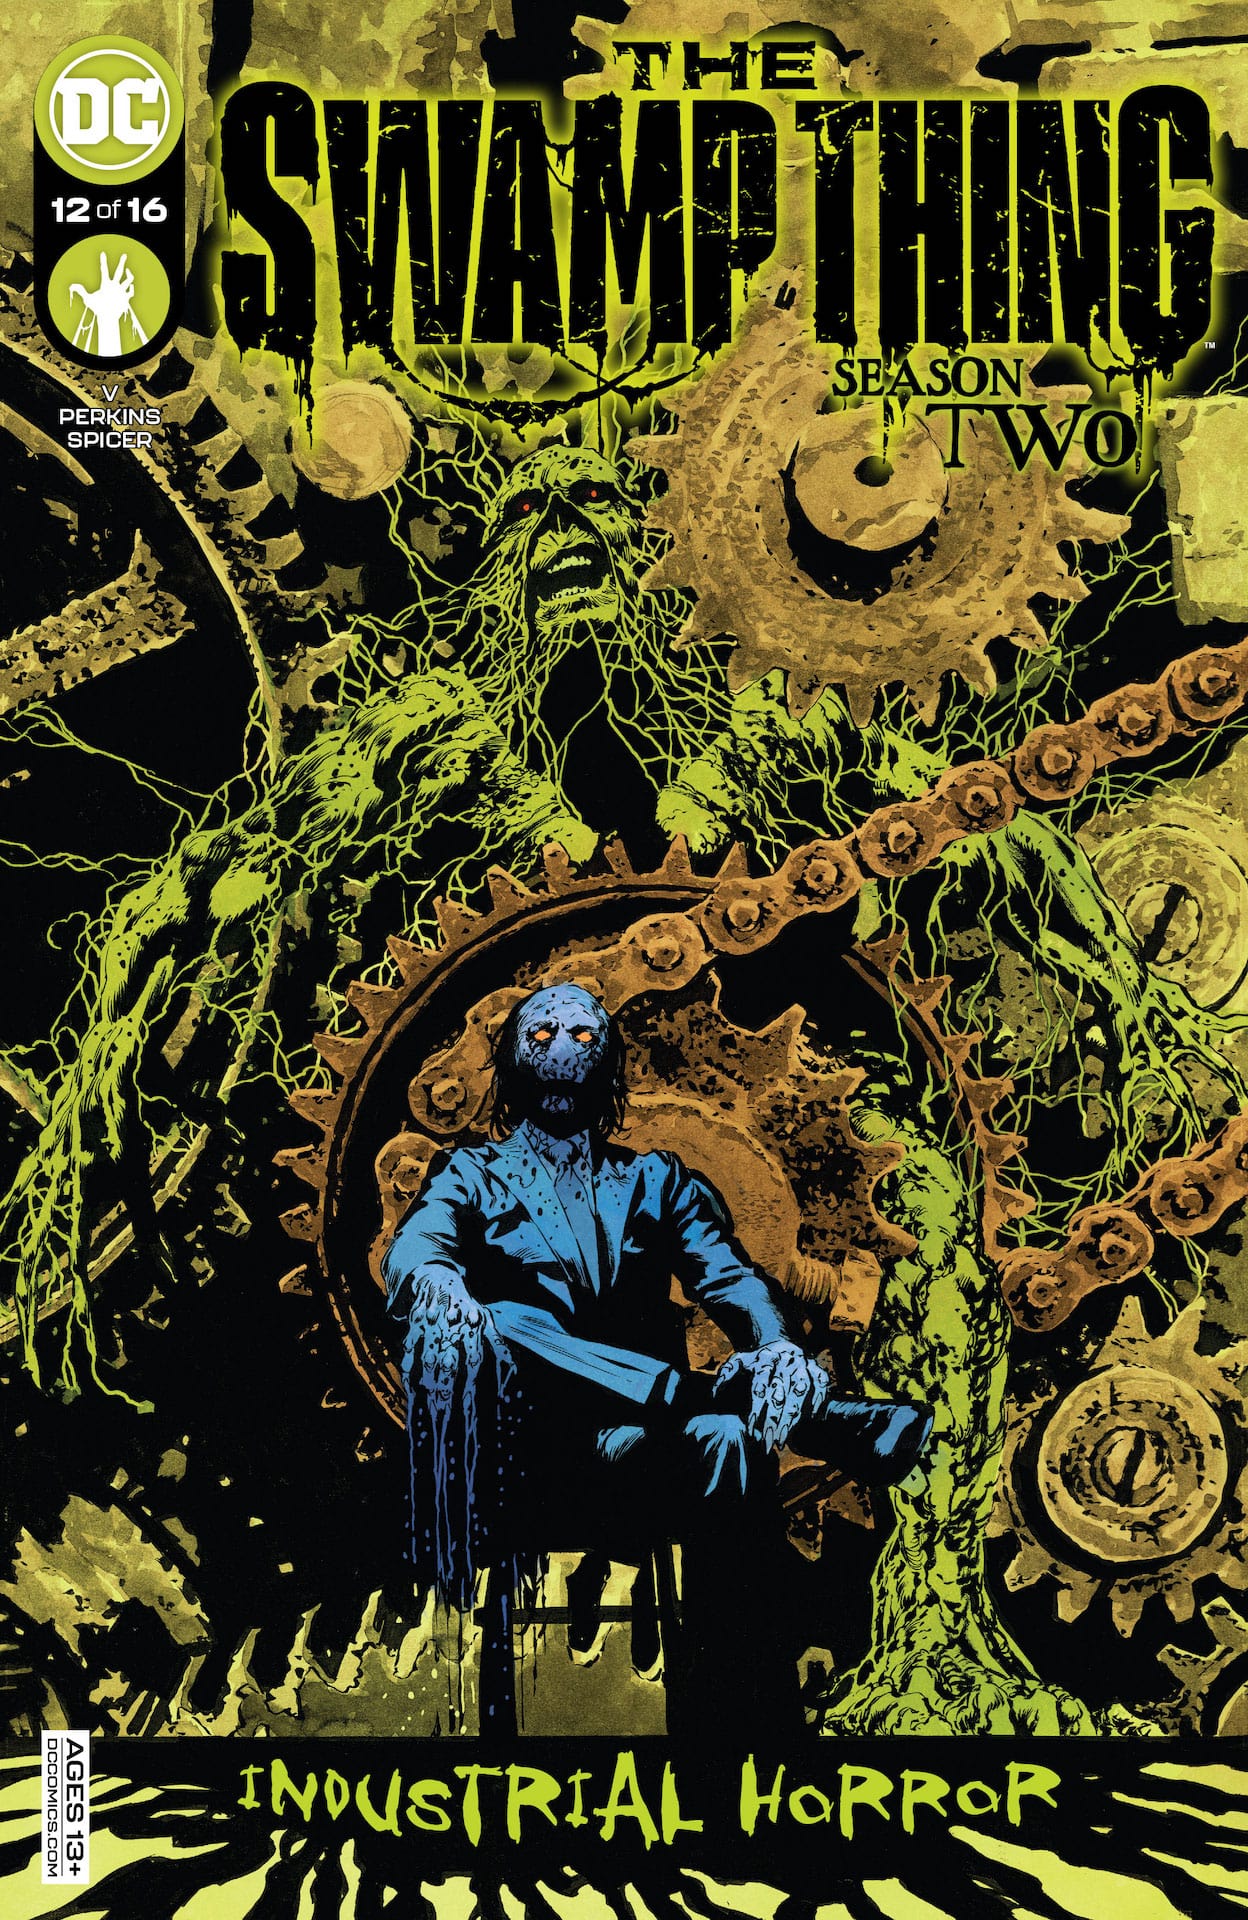 DC Preview: The Swamp Thing #12